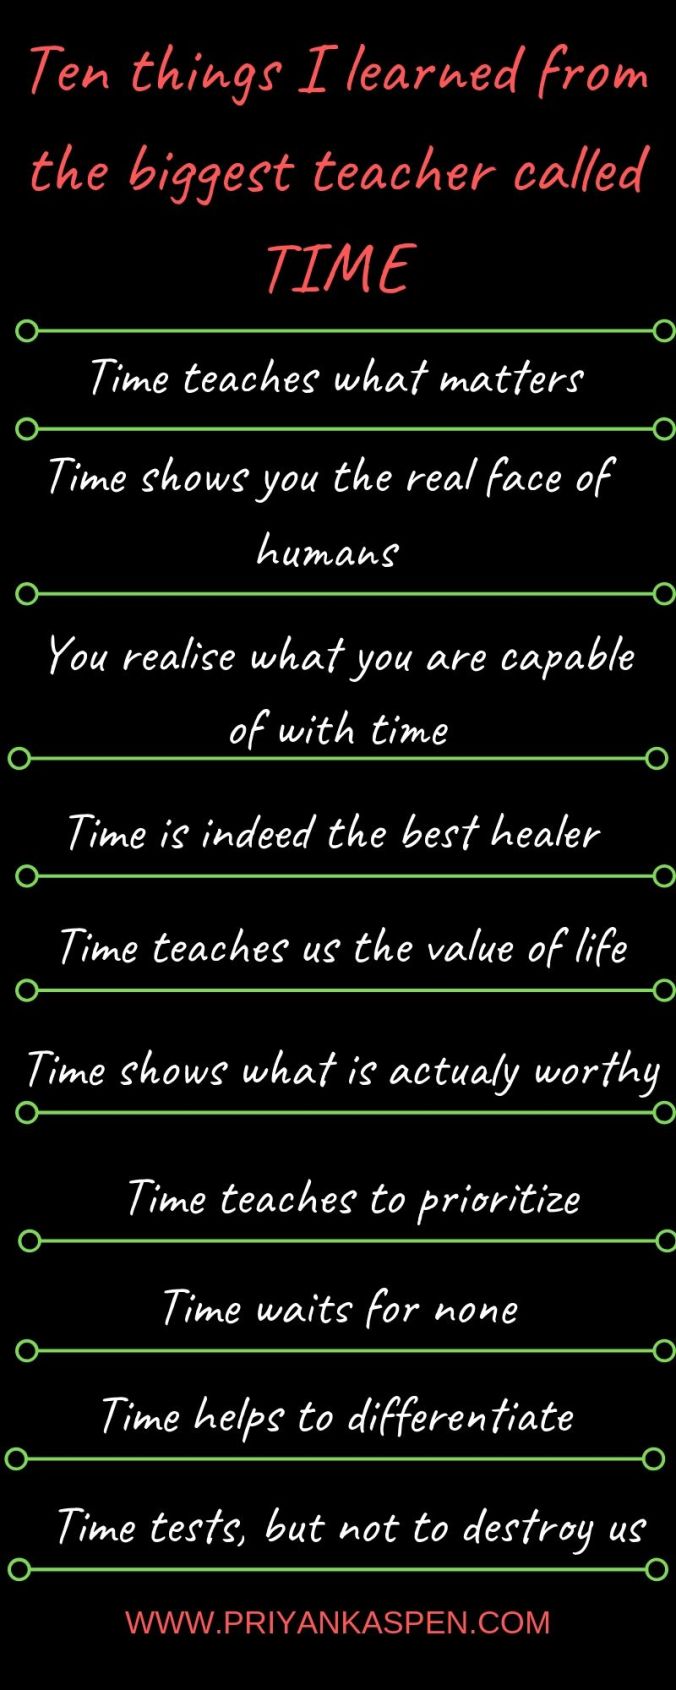 Time is the biggest teacher